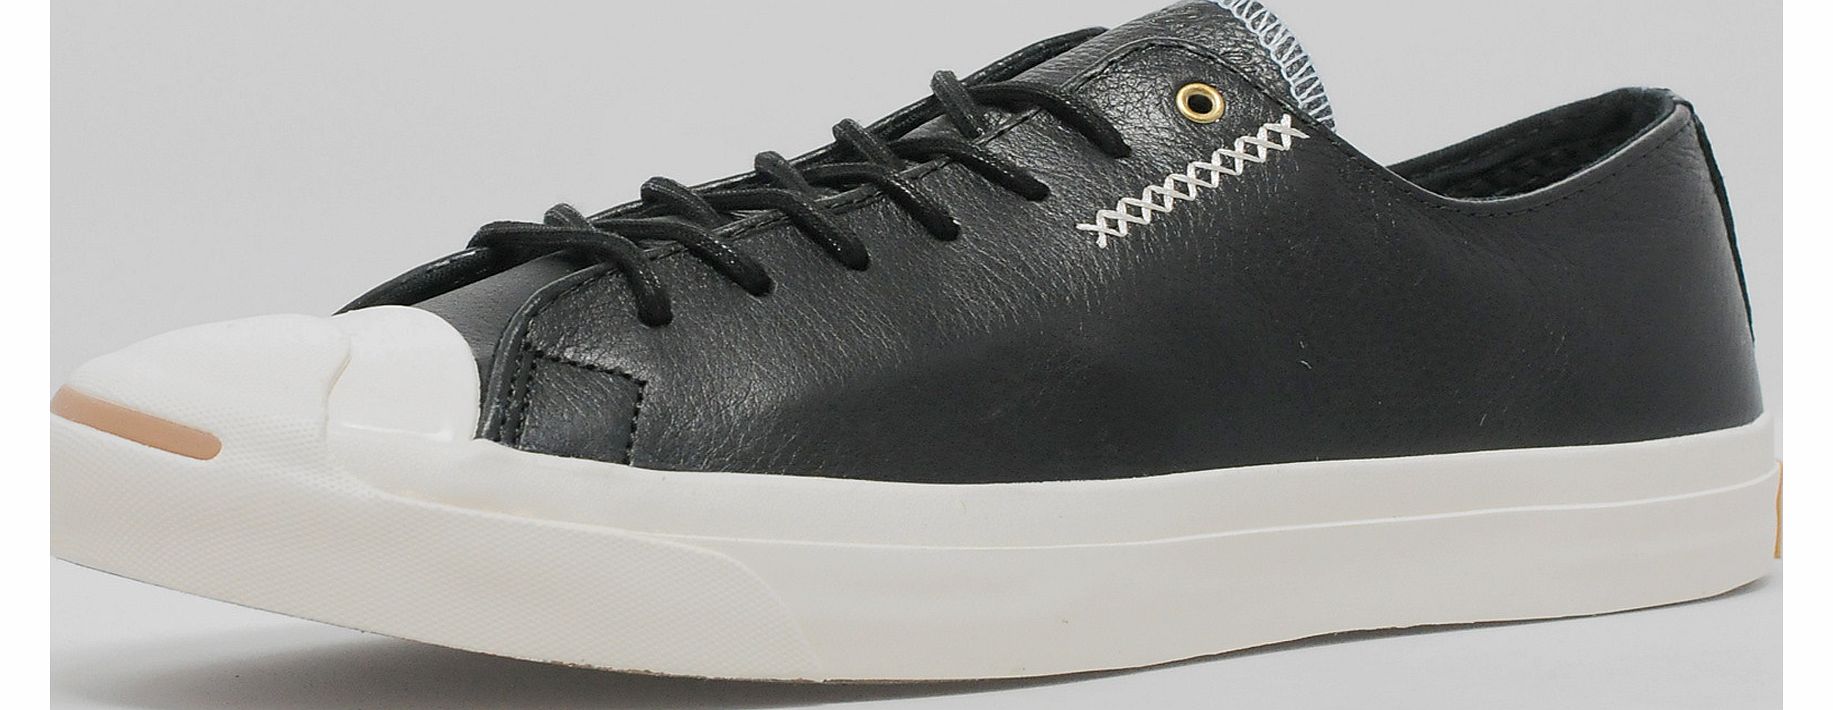 Converse Jack Purcell Cross Stitch Leather